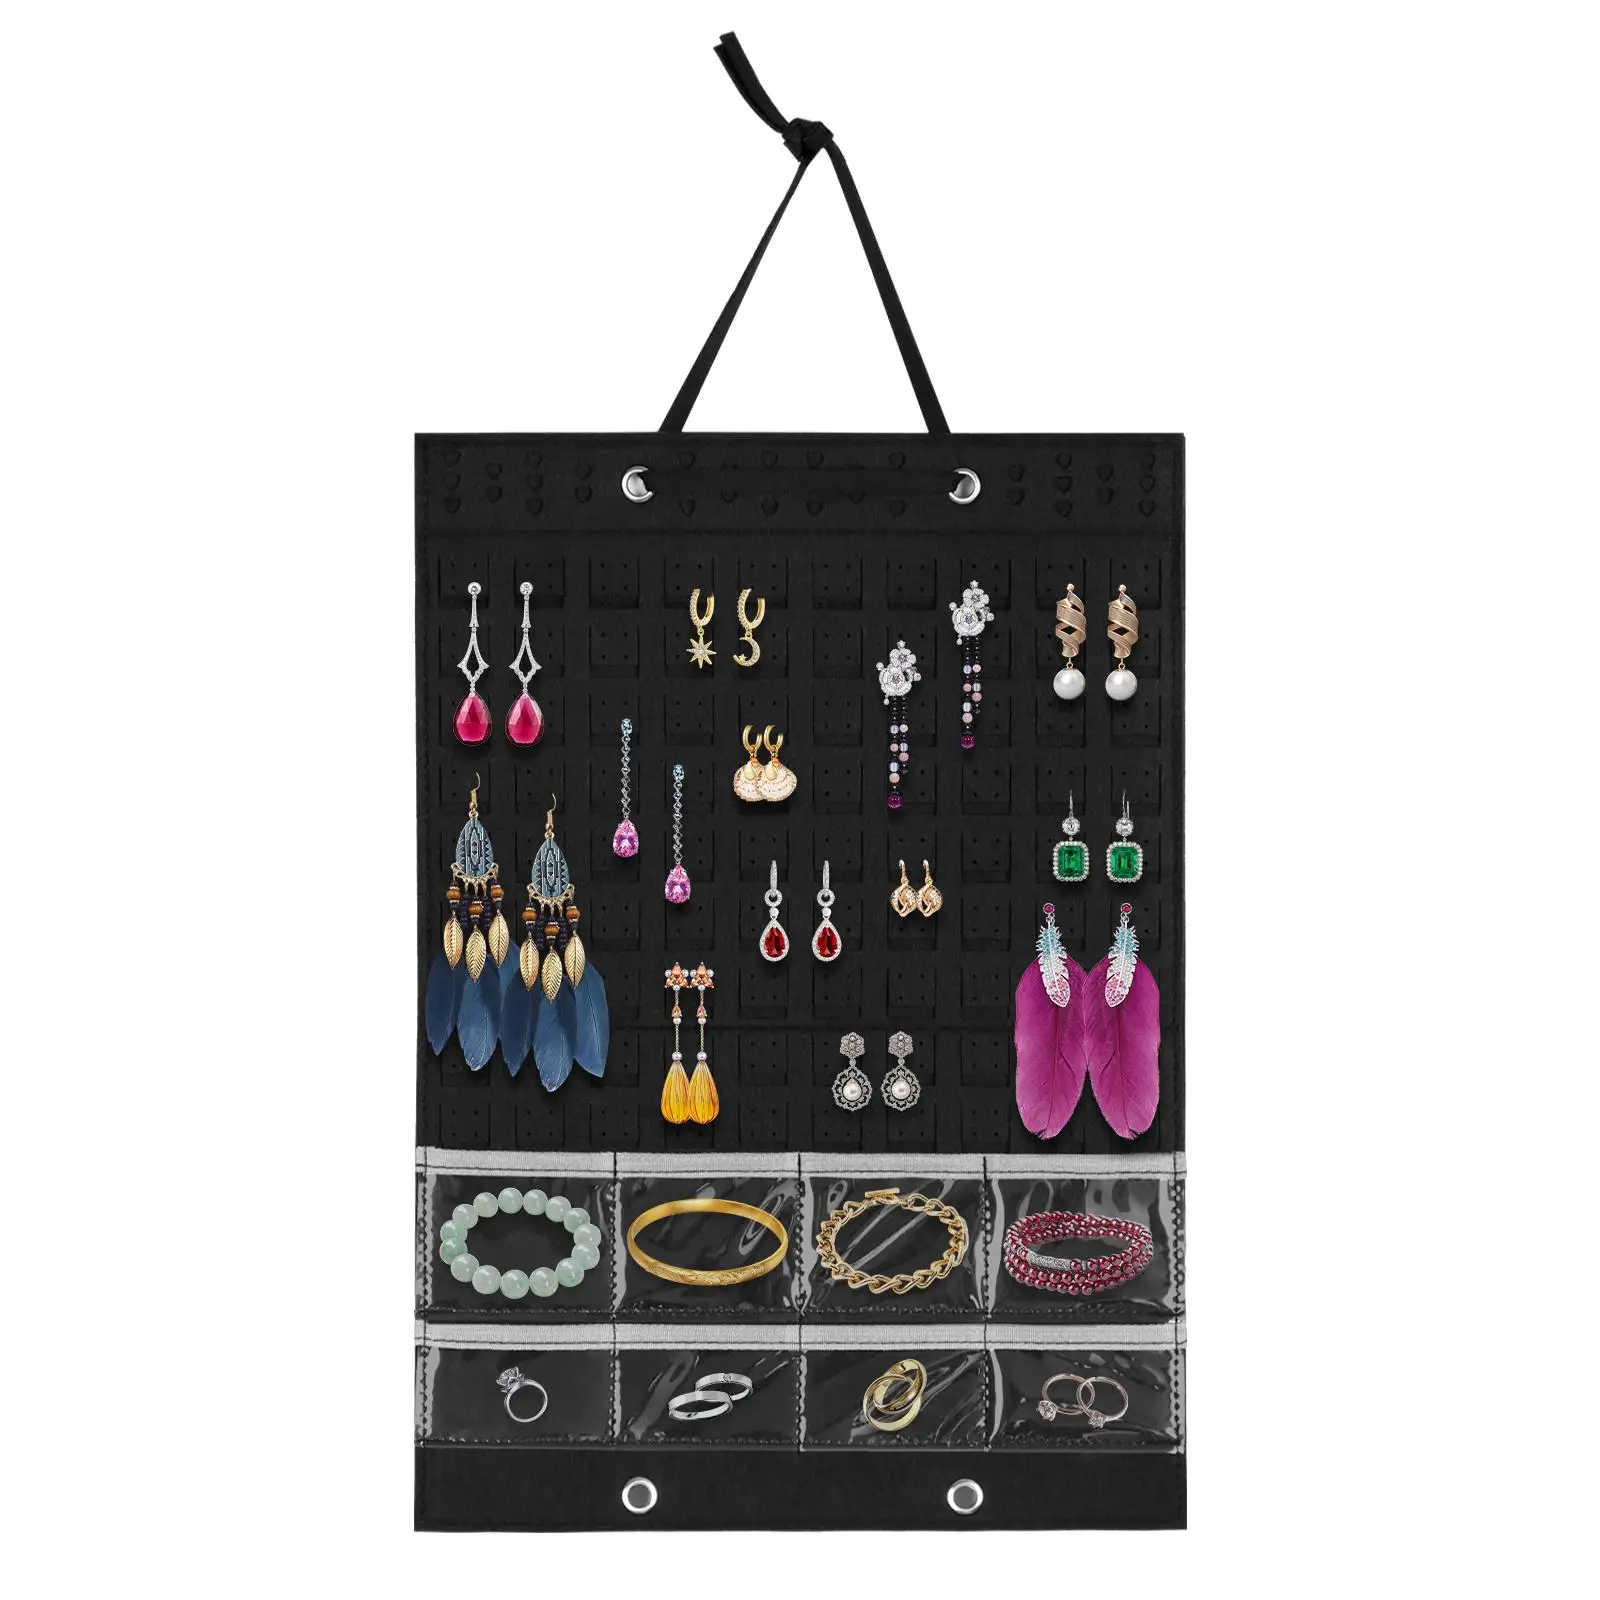 Hanging Jewelry Organizer Storage, Double Sided Jewelry Storage Organizer, Earrings Hanger, Jewelry Holder for Showcase Wall